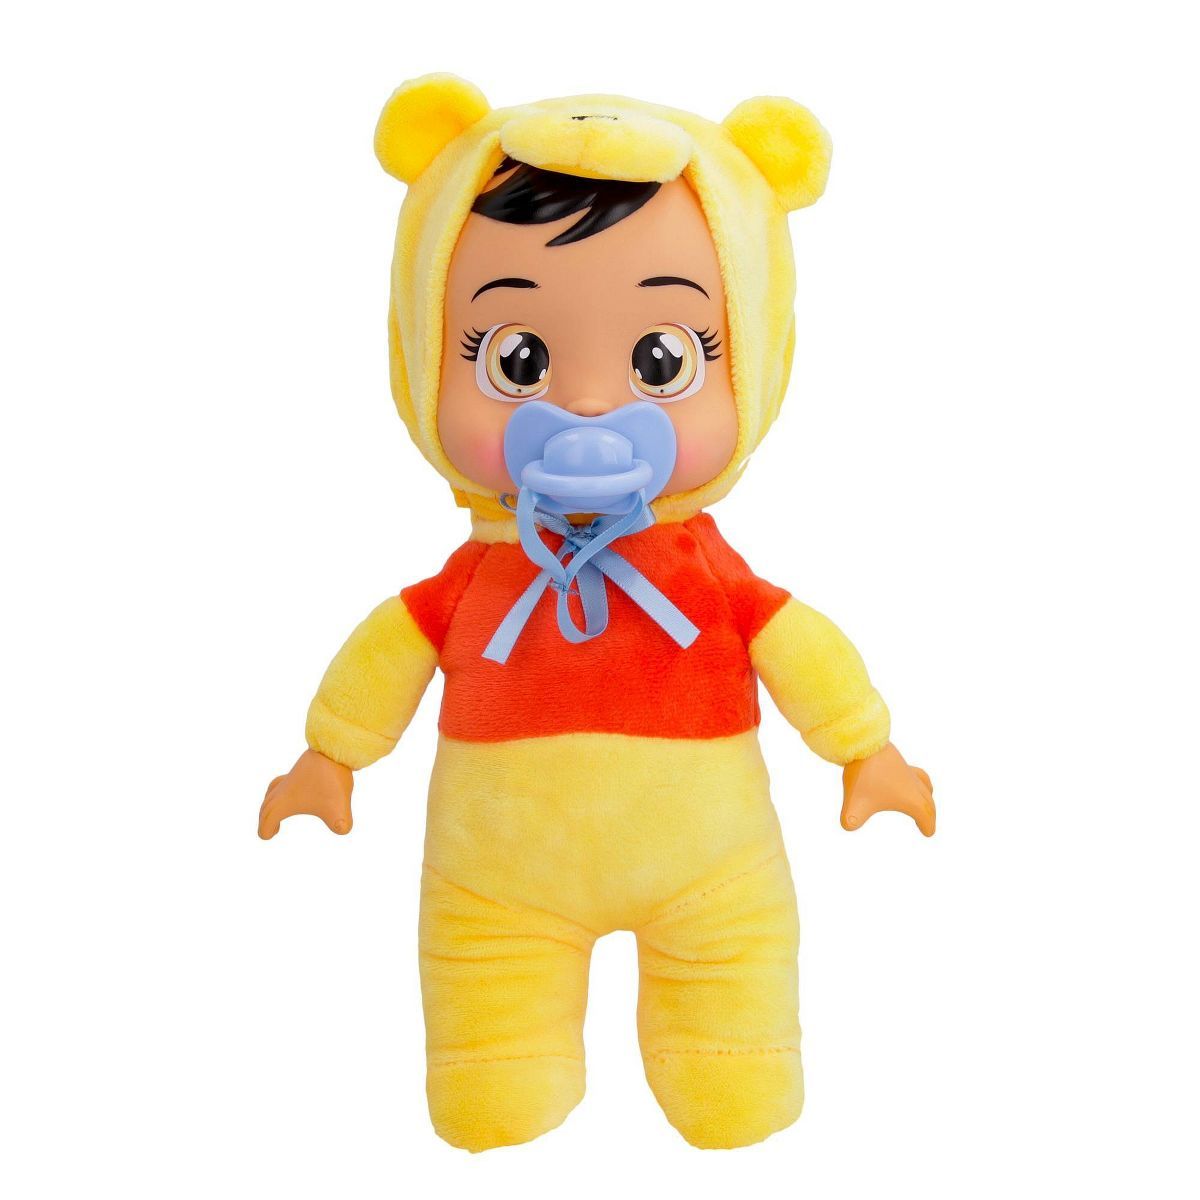 Cry Babies Disney 9" Plush Baby Doll Tiny Cuddles Inspired by Disney Pooh That Cry Real Tears | Target